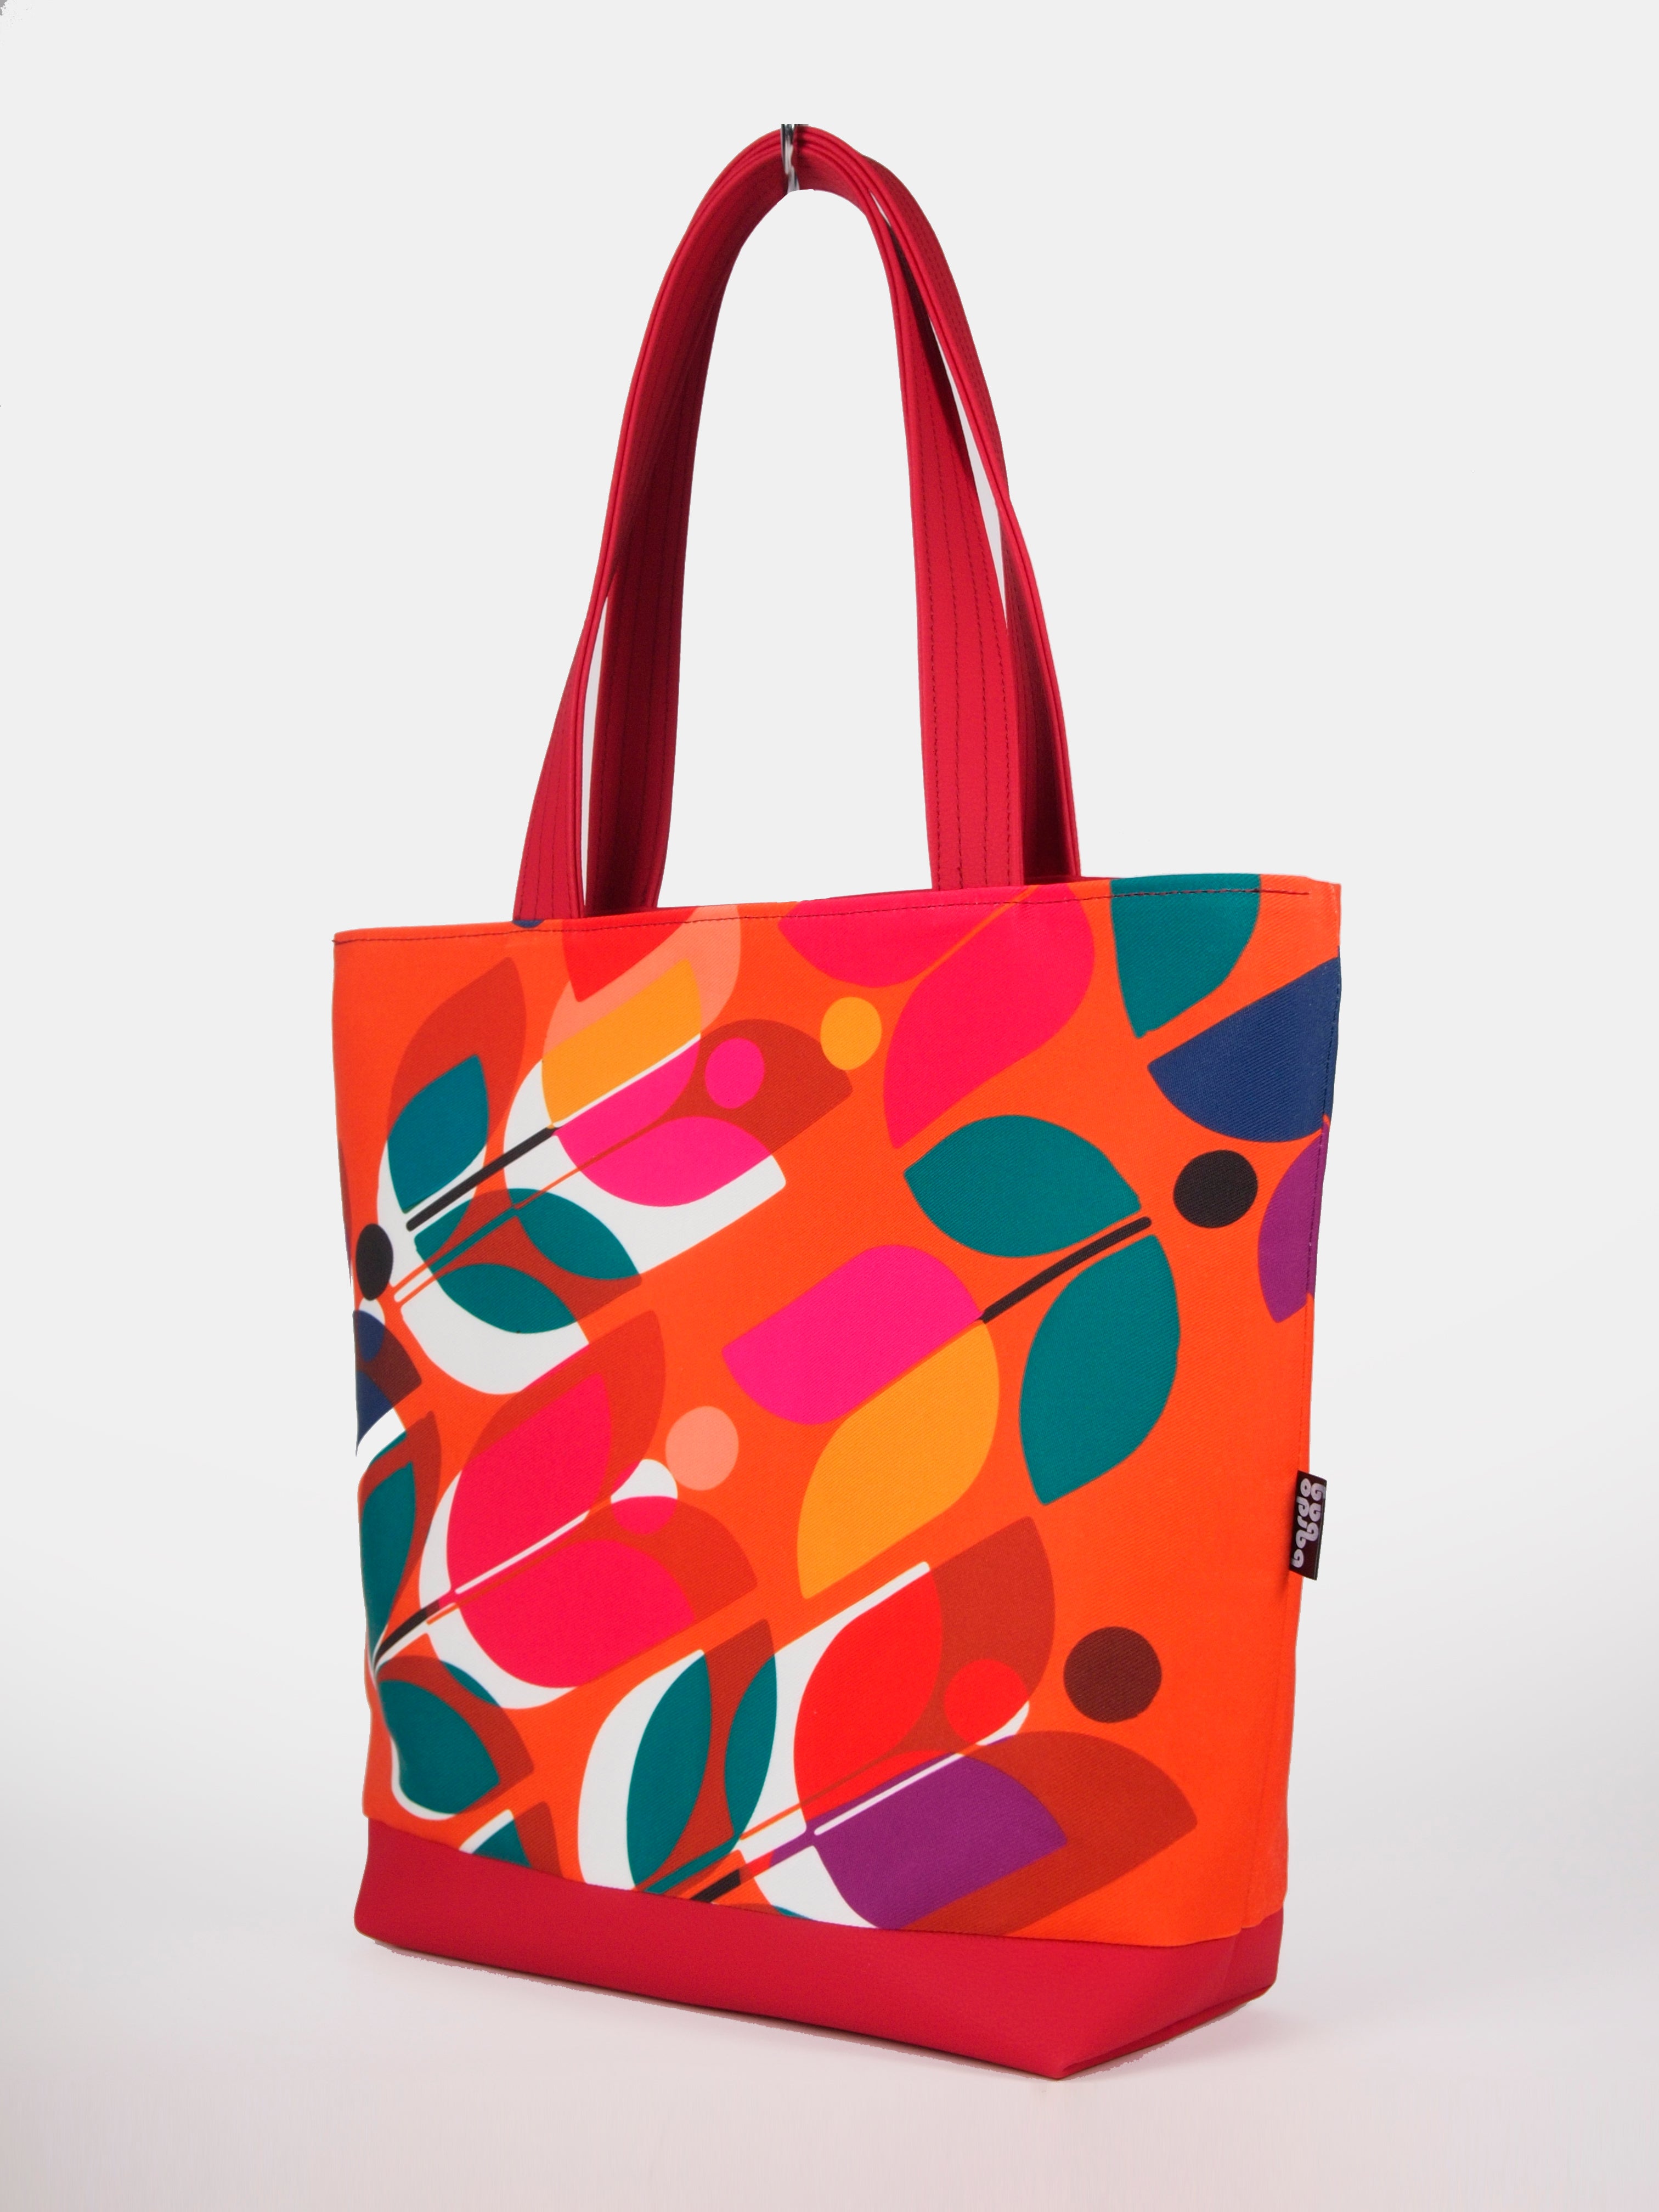 Bardo large tote bag - Song of the tulips - Premium large tote bag from Bardo bag - Just lvabstract, art bag, black, floral, flower, geometric abstraction, gift, green, handemade, large, nature, pink, purple, red, tablet, tote bag, tulips, vegan leather, woman, work bag89.00! Shop now at BARDO ART WORKS